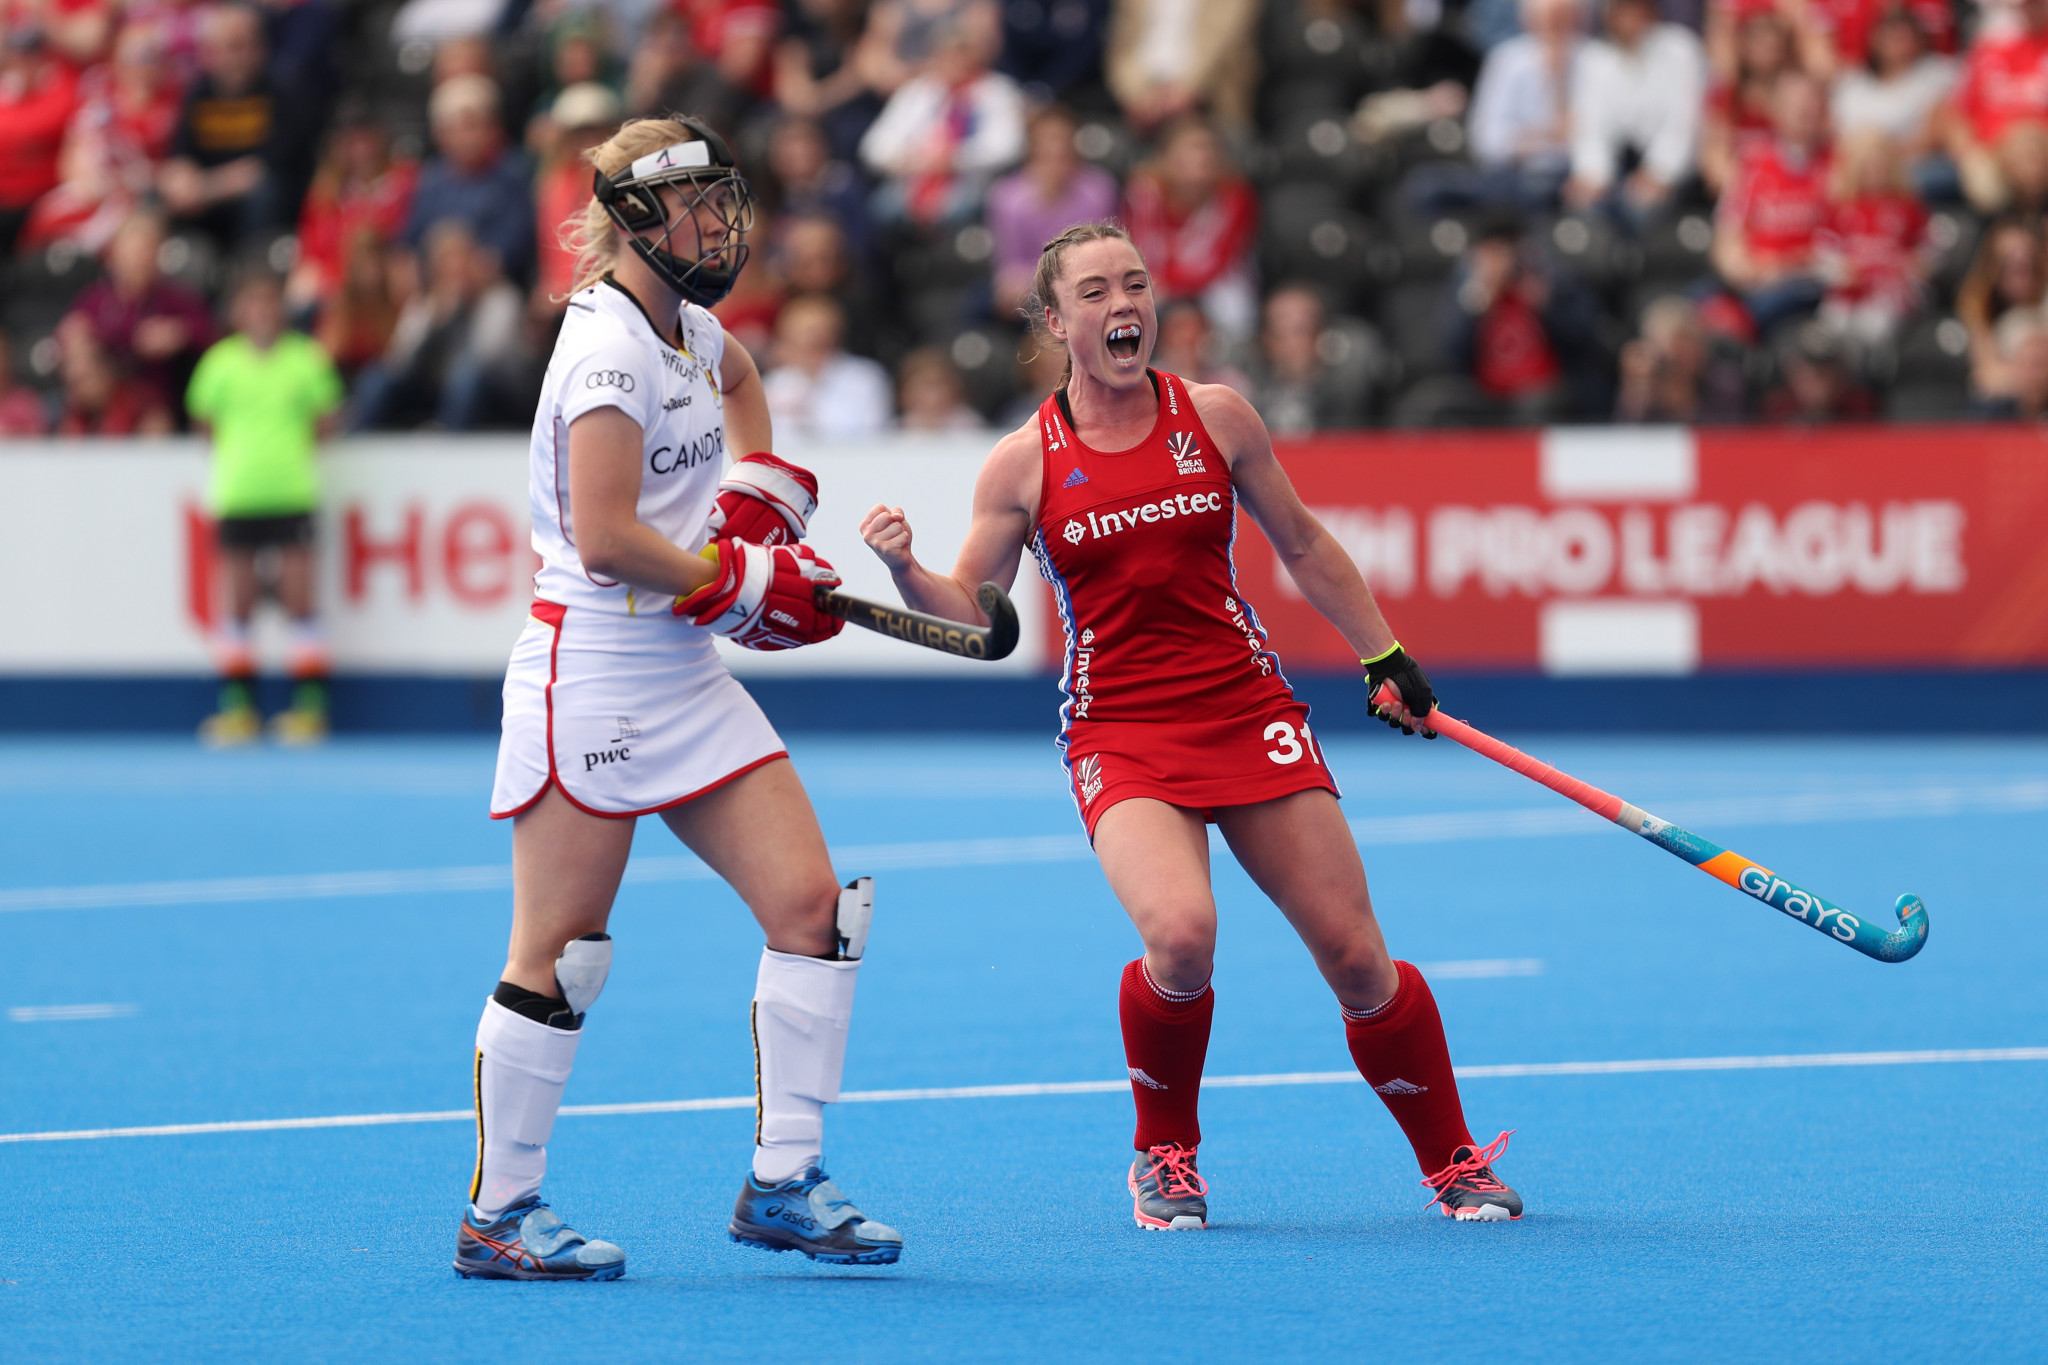 Great Britain women claim much-needed victory over Belgium in FIH Pro League